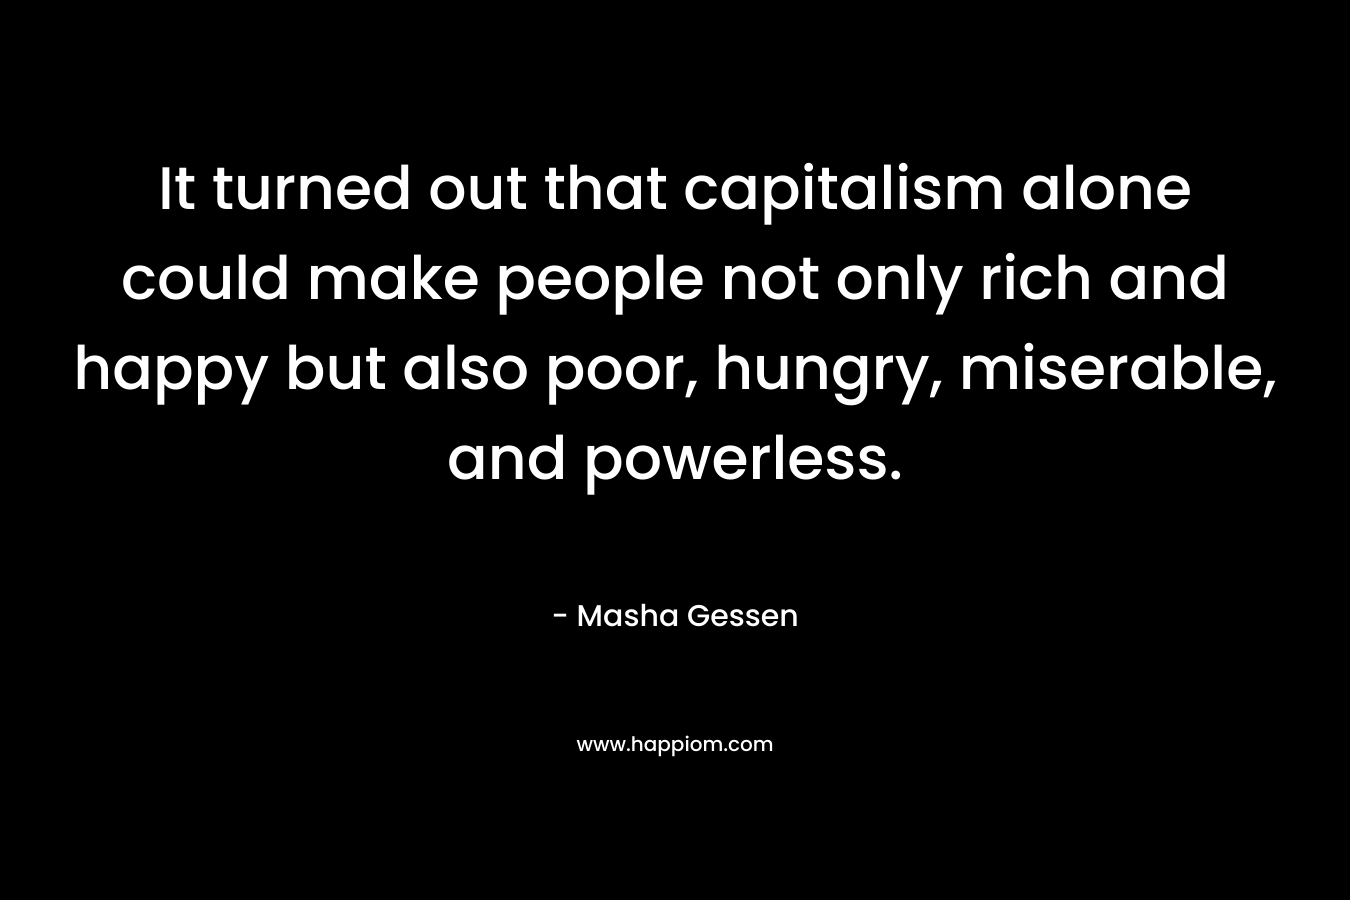 It turned out that capitalism alone could make people not only rich and happy but also poor, hungry, miserable, and powerless. – Masha Gessen